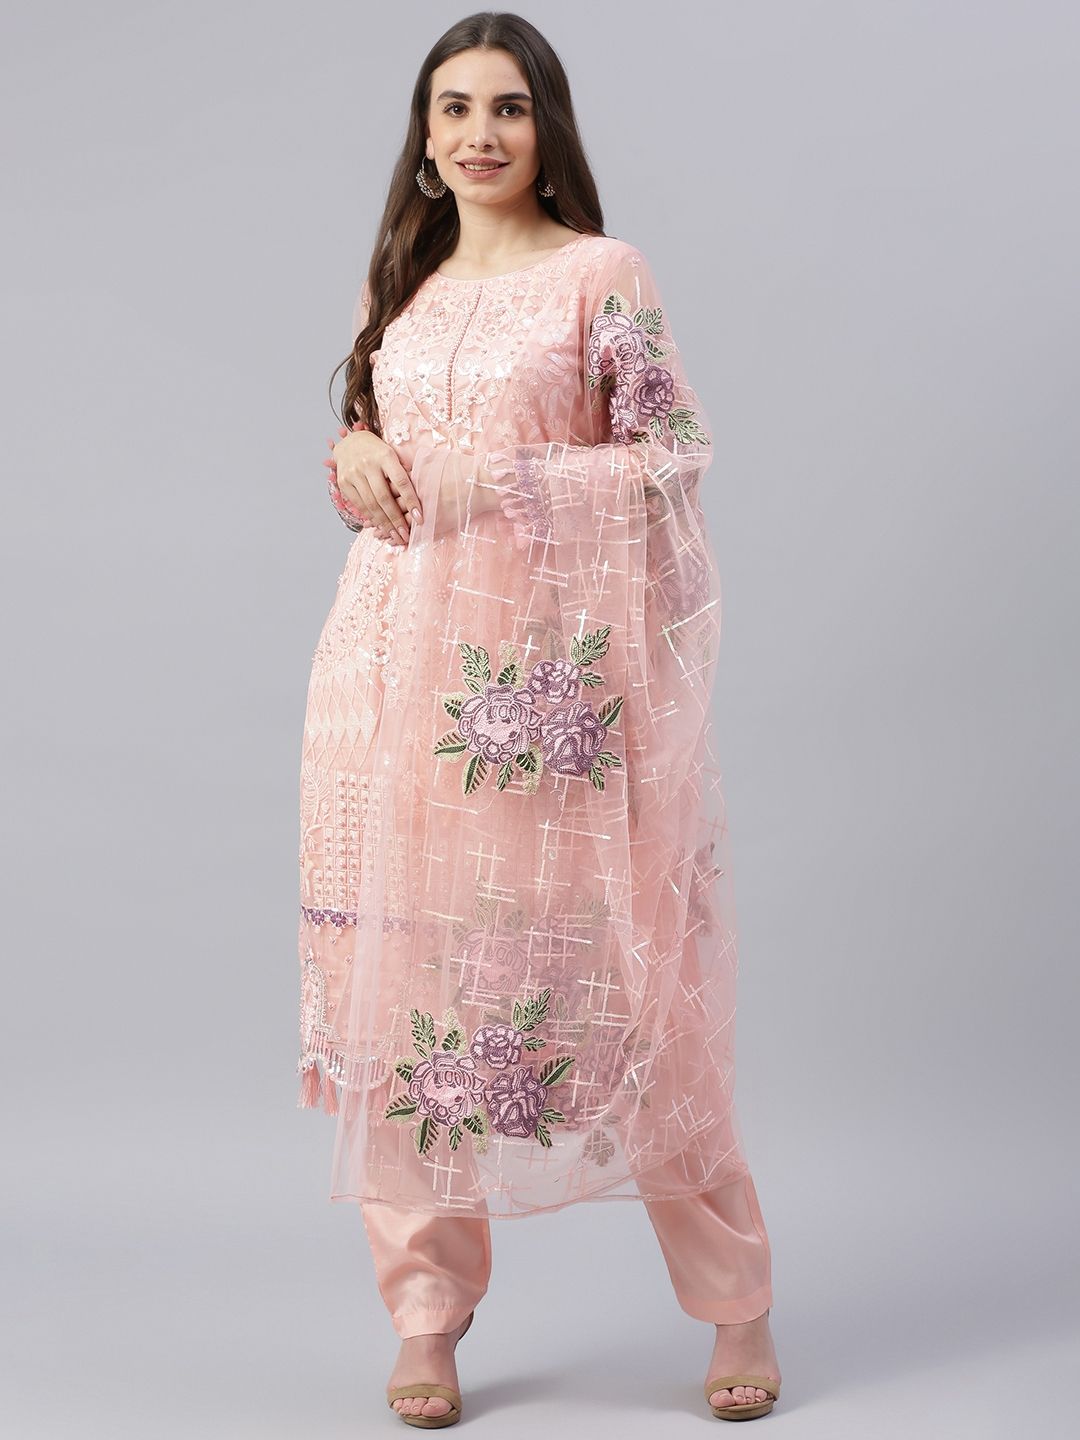 Readiprint Fashions Peach-Coloured Embroidered Unstitched Dress Material Price in India